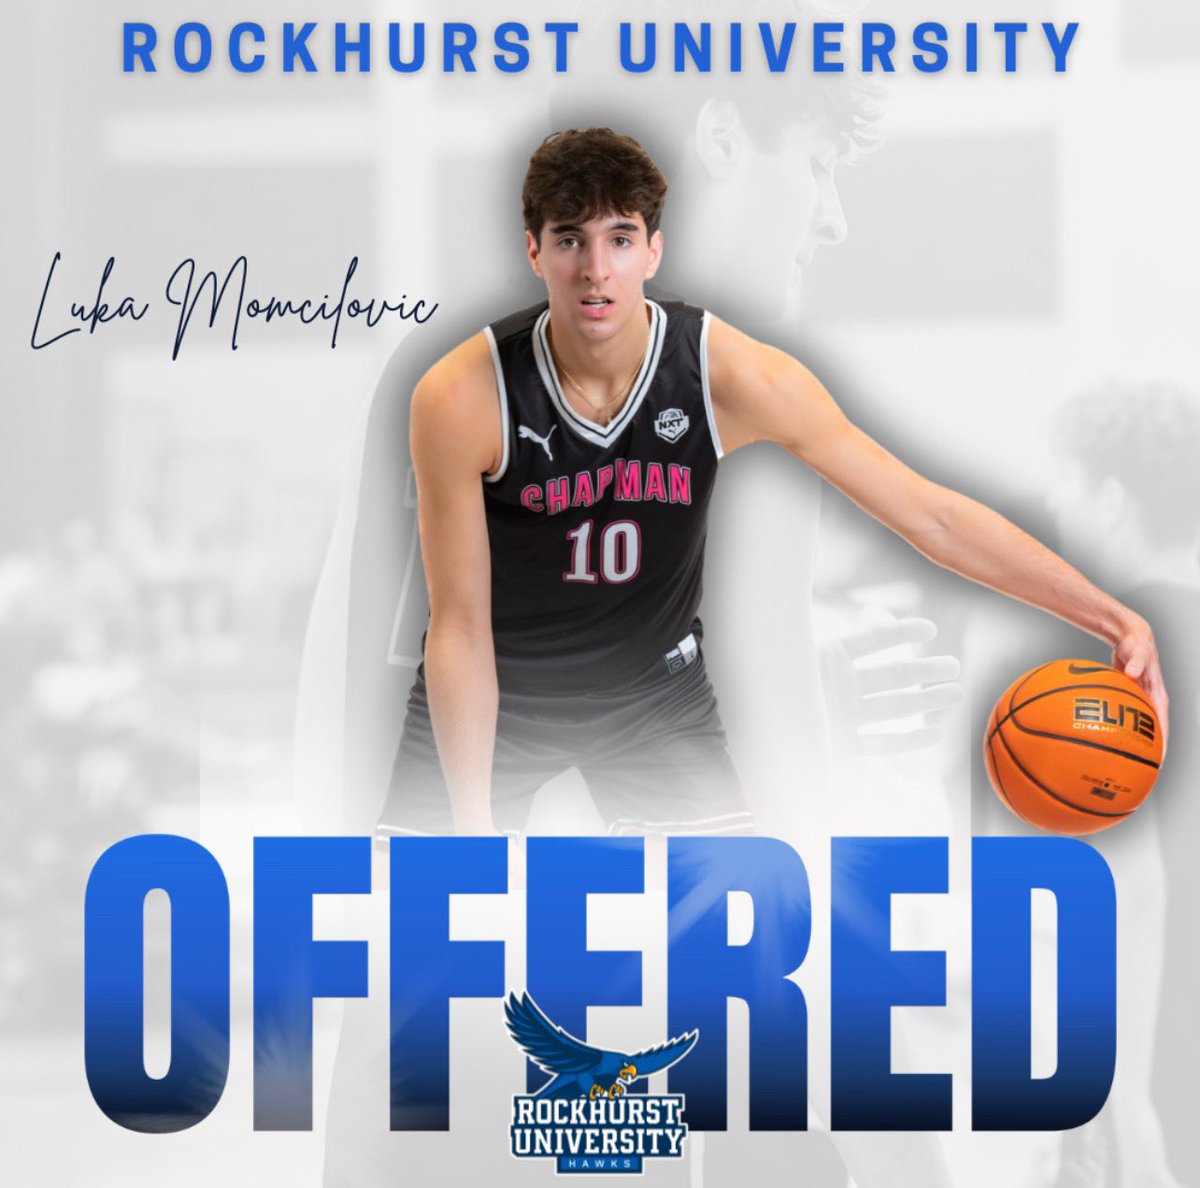 Congratulations @_LukaMomcilovic on your offer from @RockhurstMBB